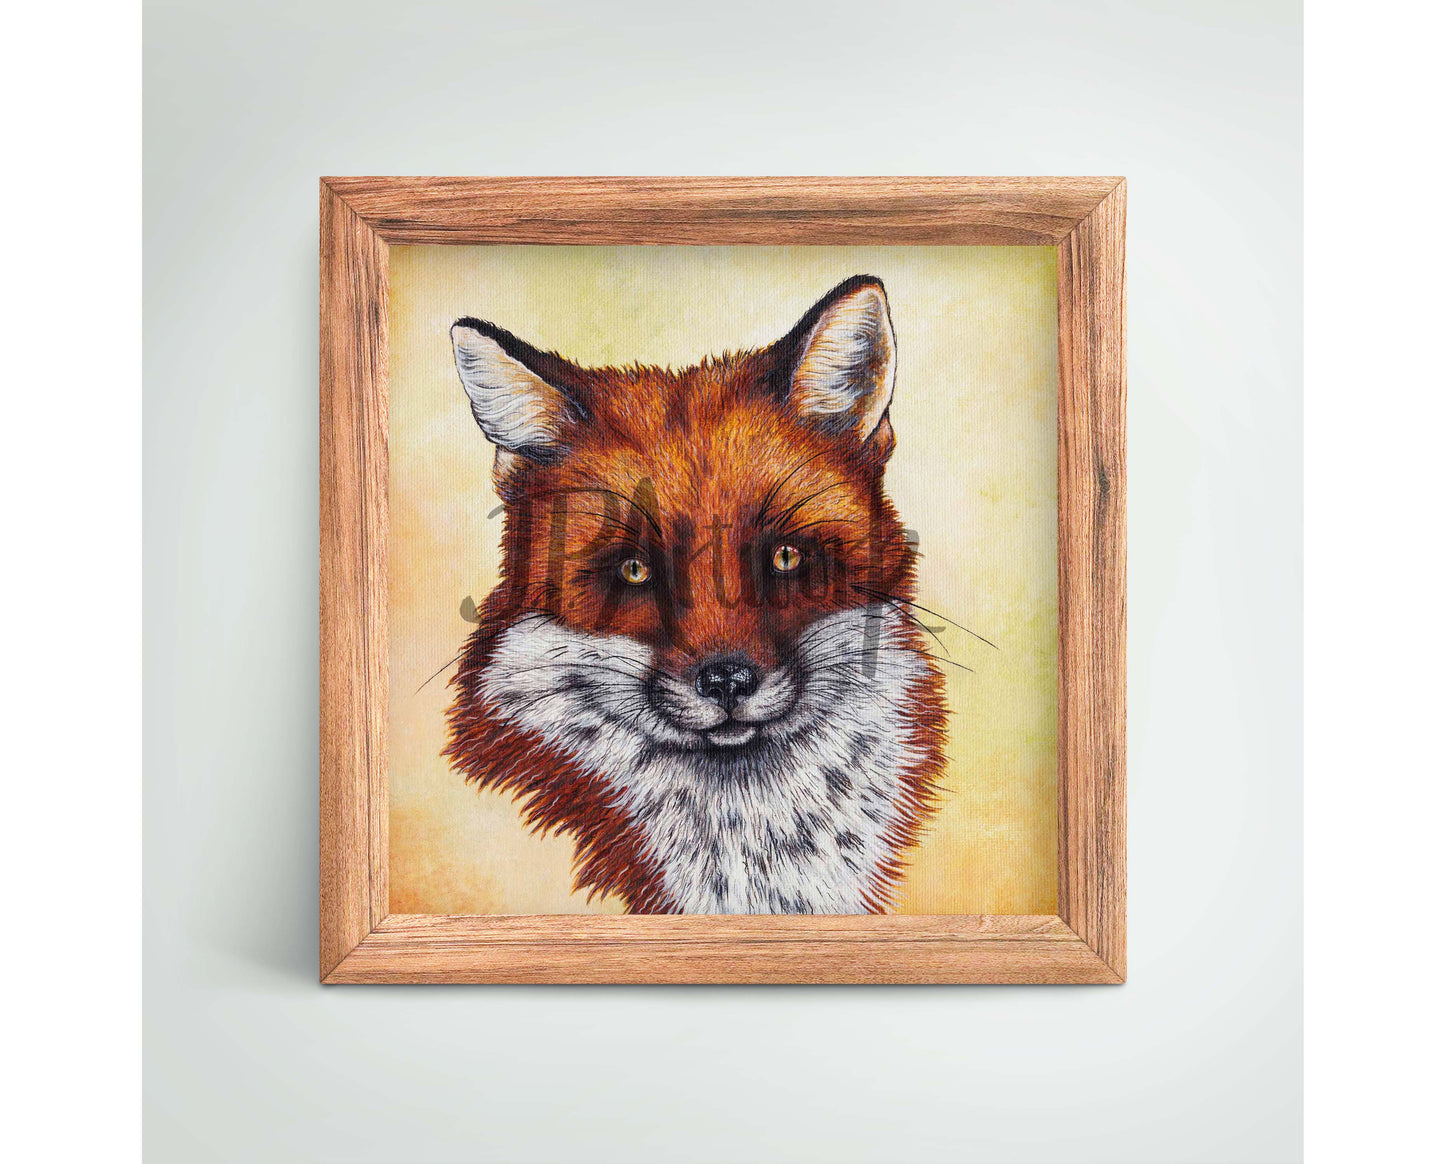 Fox portrait art print; image shows a foxes face floating on an autumnal yellow and orange background. This image shows a mock up of the print in a square wooden frame. Artwork is taken from an original acrylic painting by Jenny Pond, JP Artwork